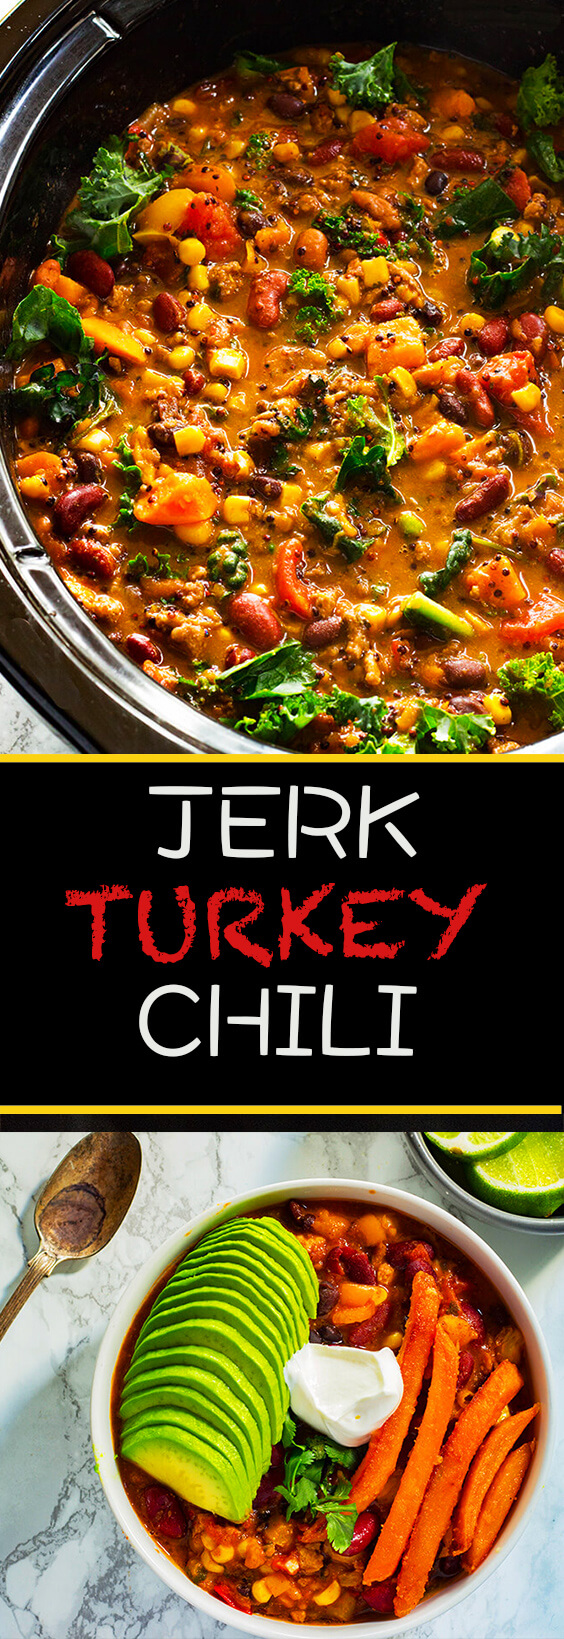 This Slow- Cooker Jerk Turkey Chili recipe is the perfect weeknight dinner. It has the right amount of spice to add some excite everyone. make it today.